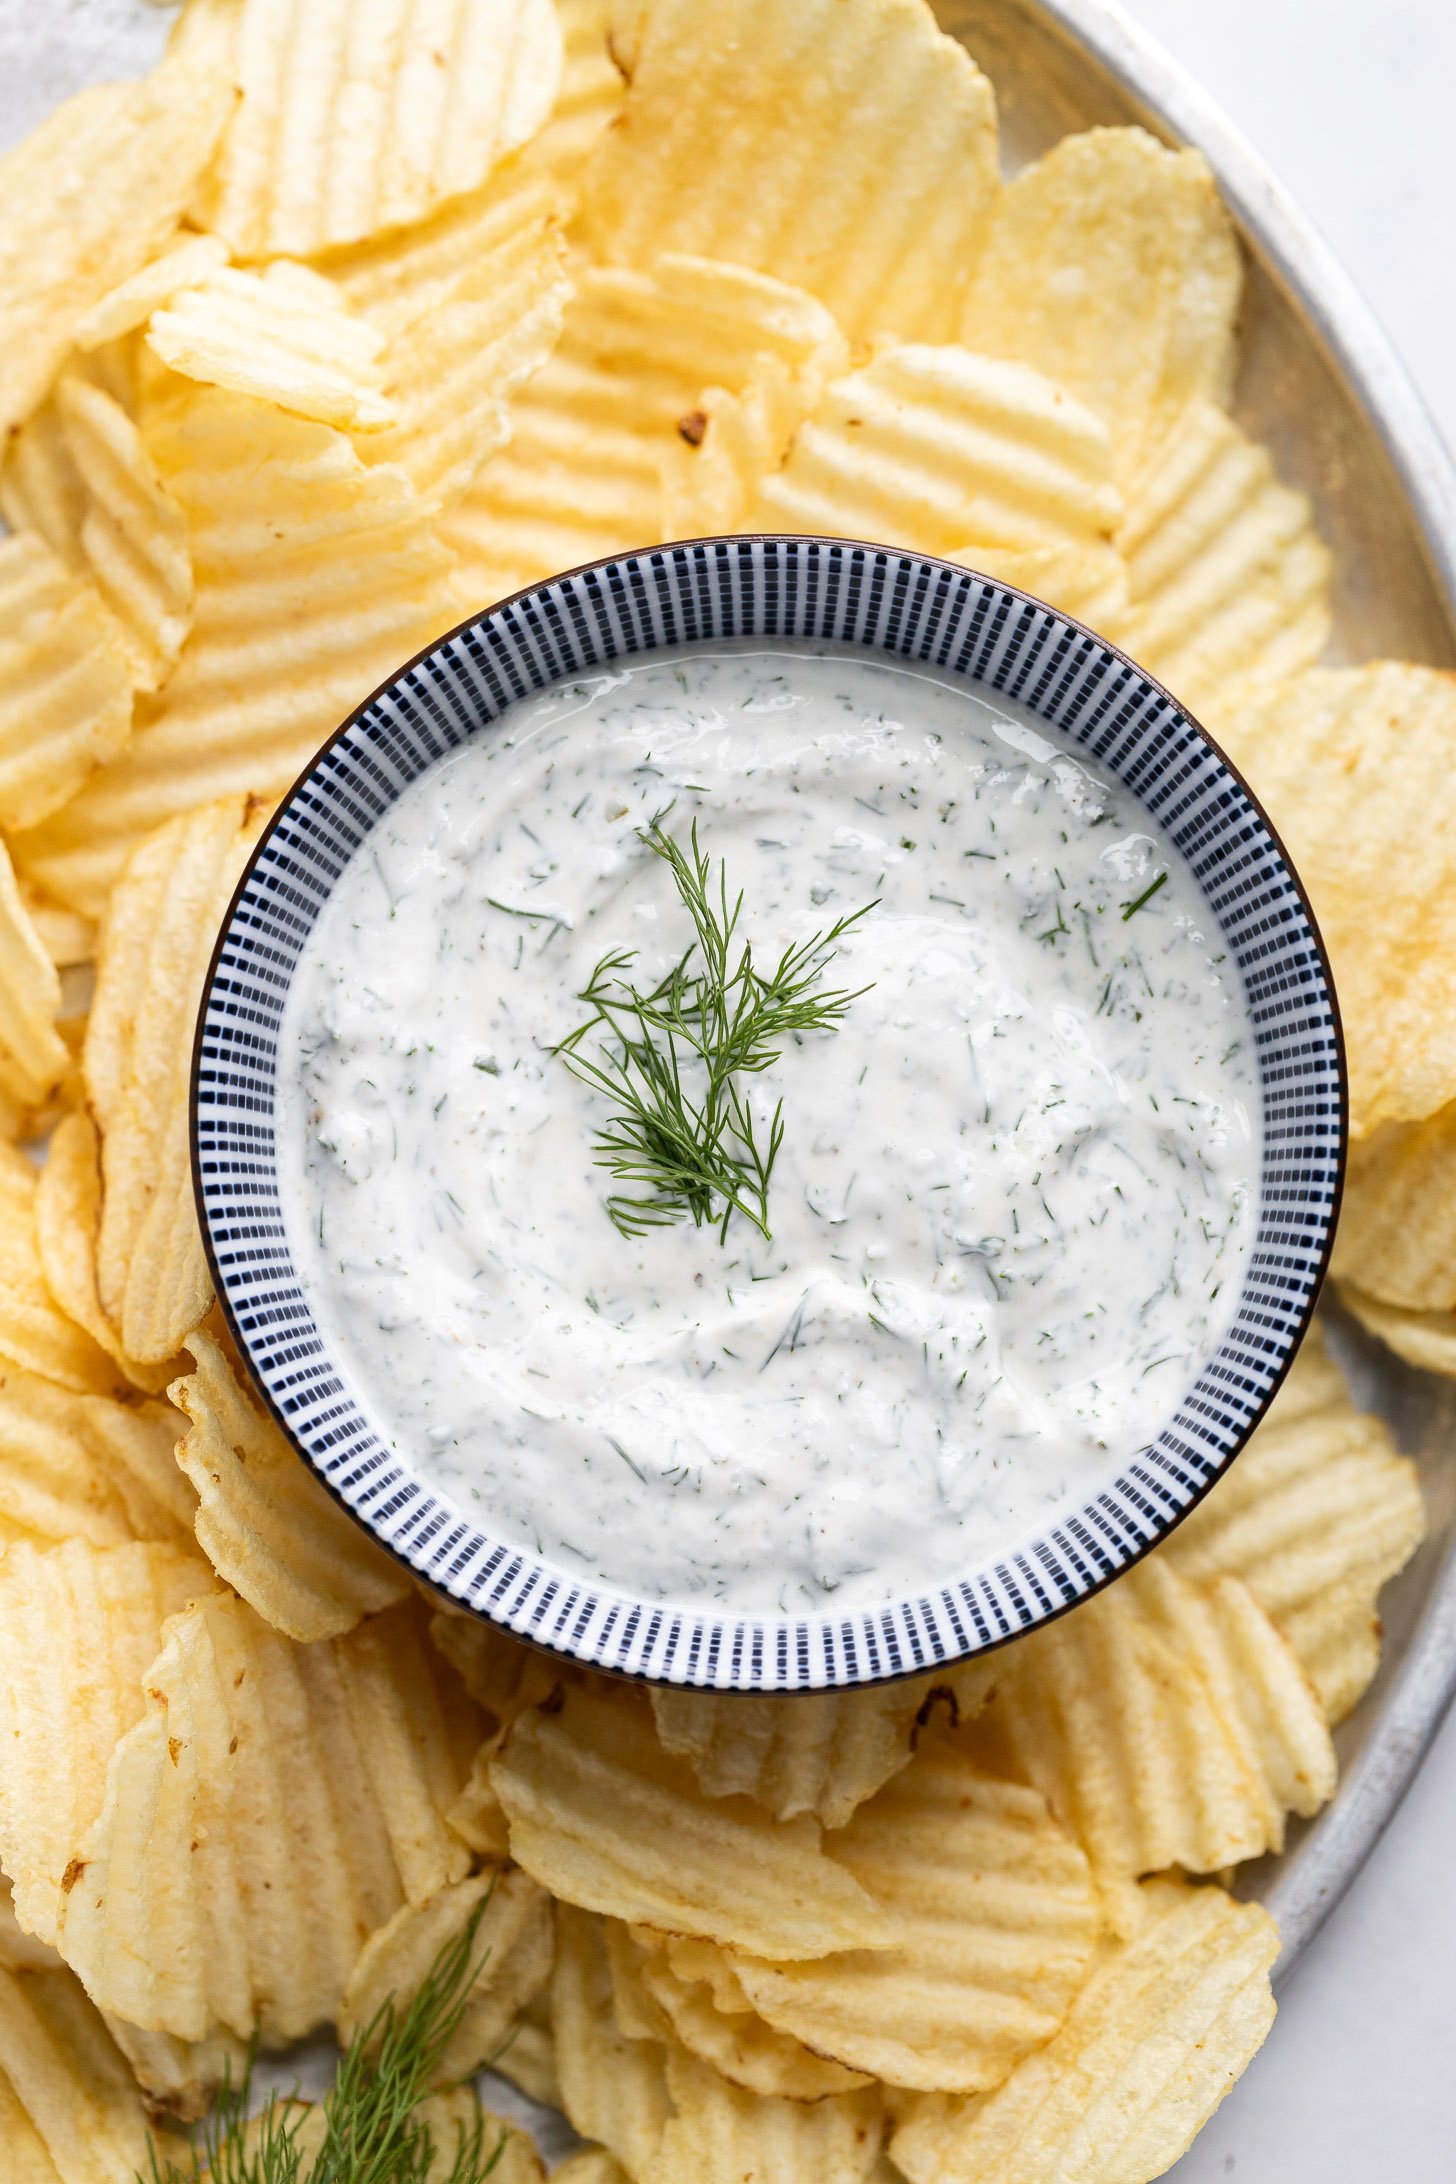 Tray of chips with dill sauce in bowl in middle.